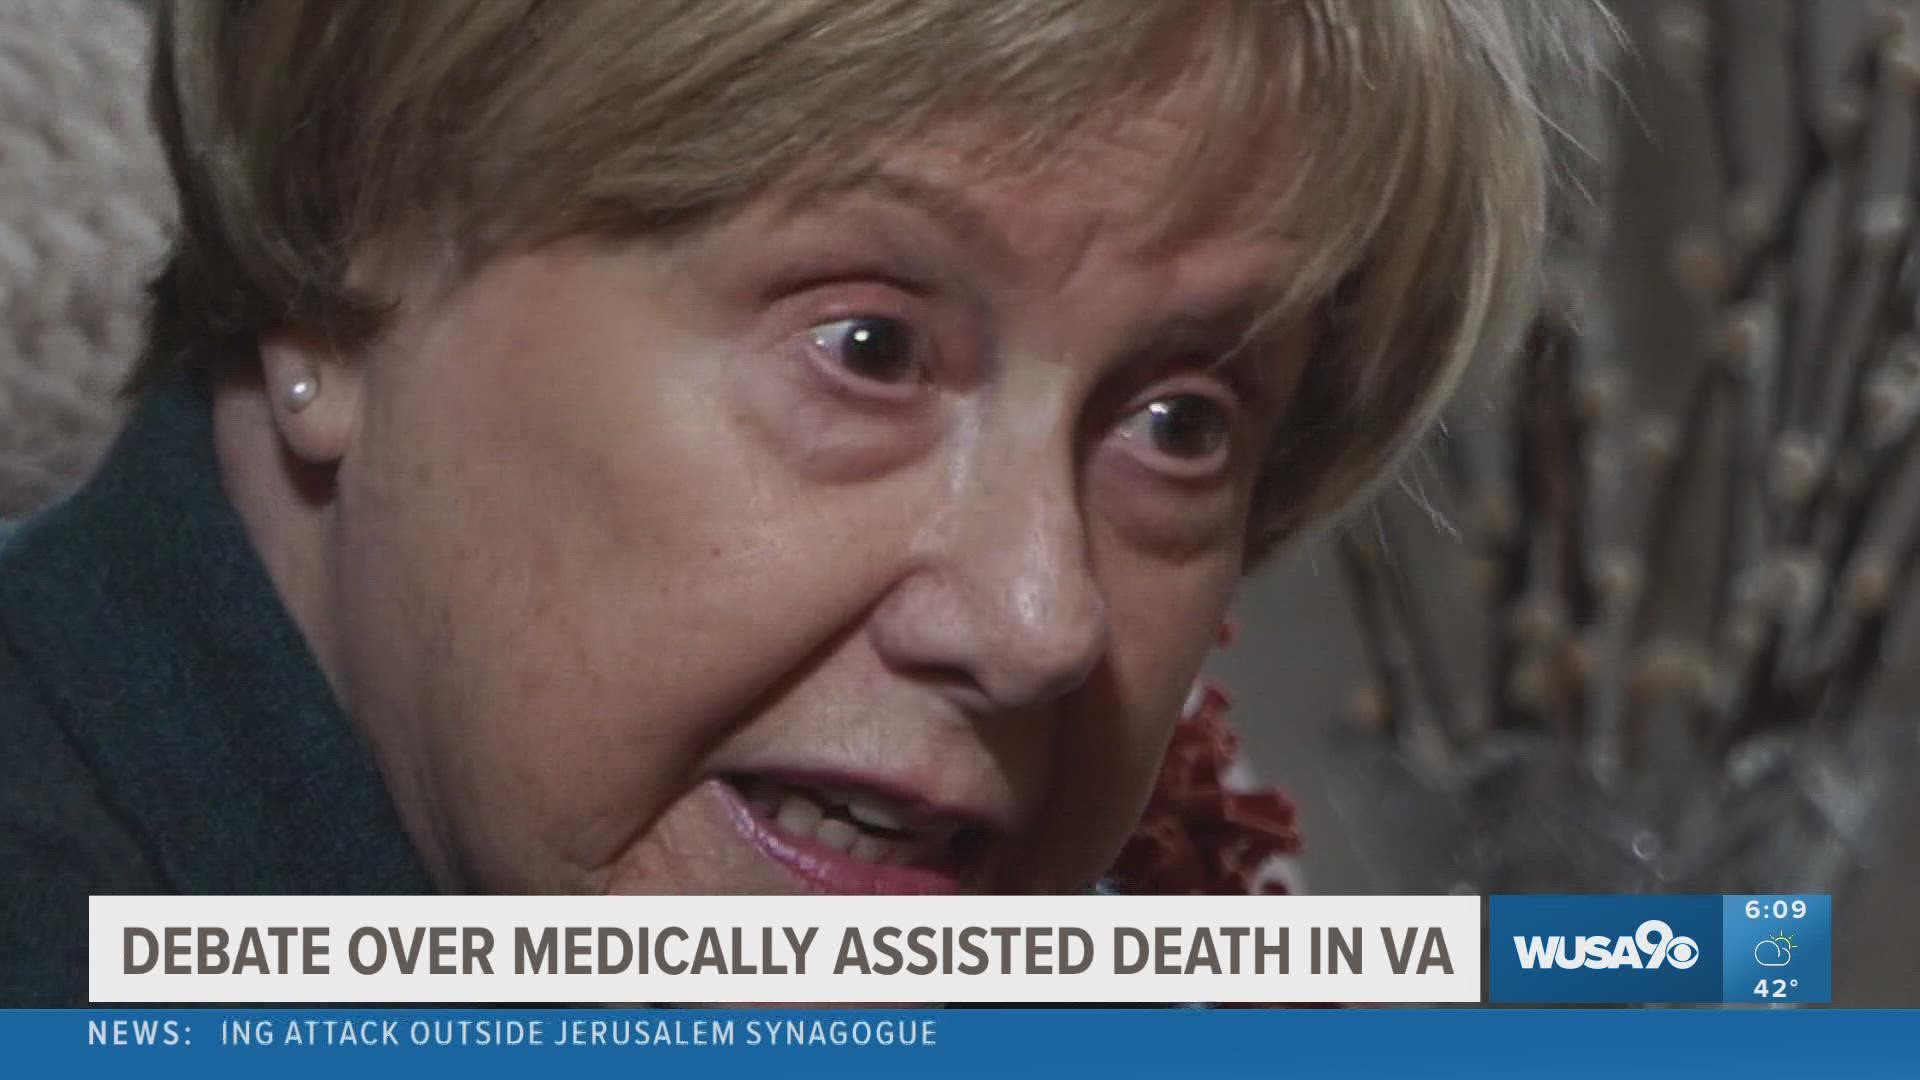 a terminally ill woman tells us -- she wants to choose her *own end-of-life journey. Virginia lawmakers put off acting on a bill.